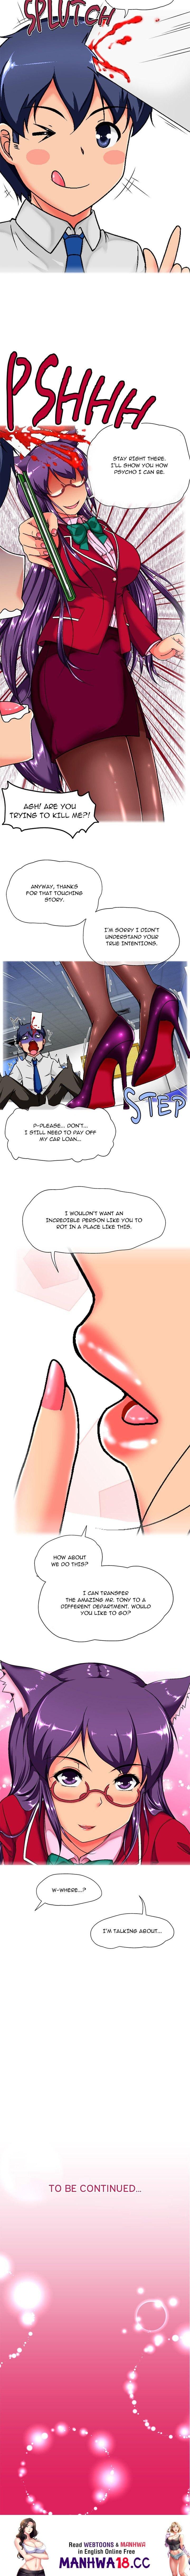 a-tale-of-tails-chap-2-11